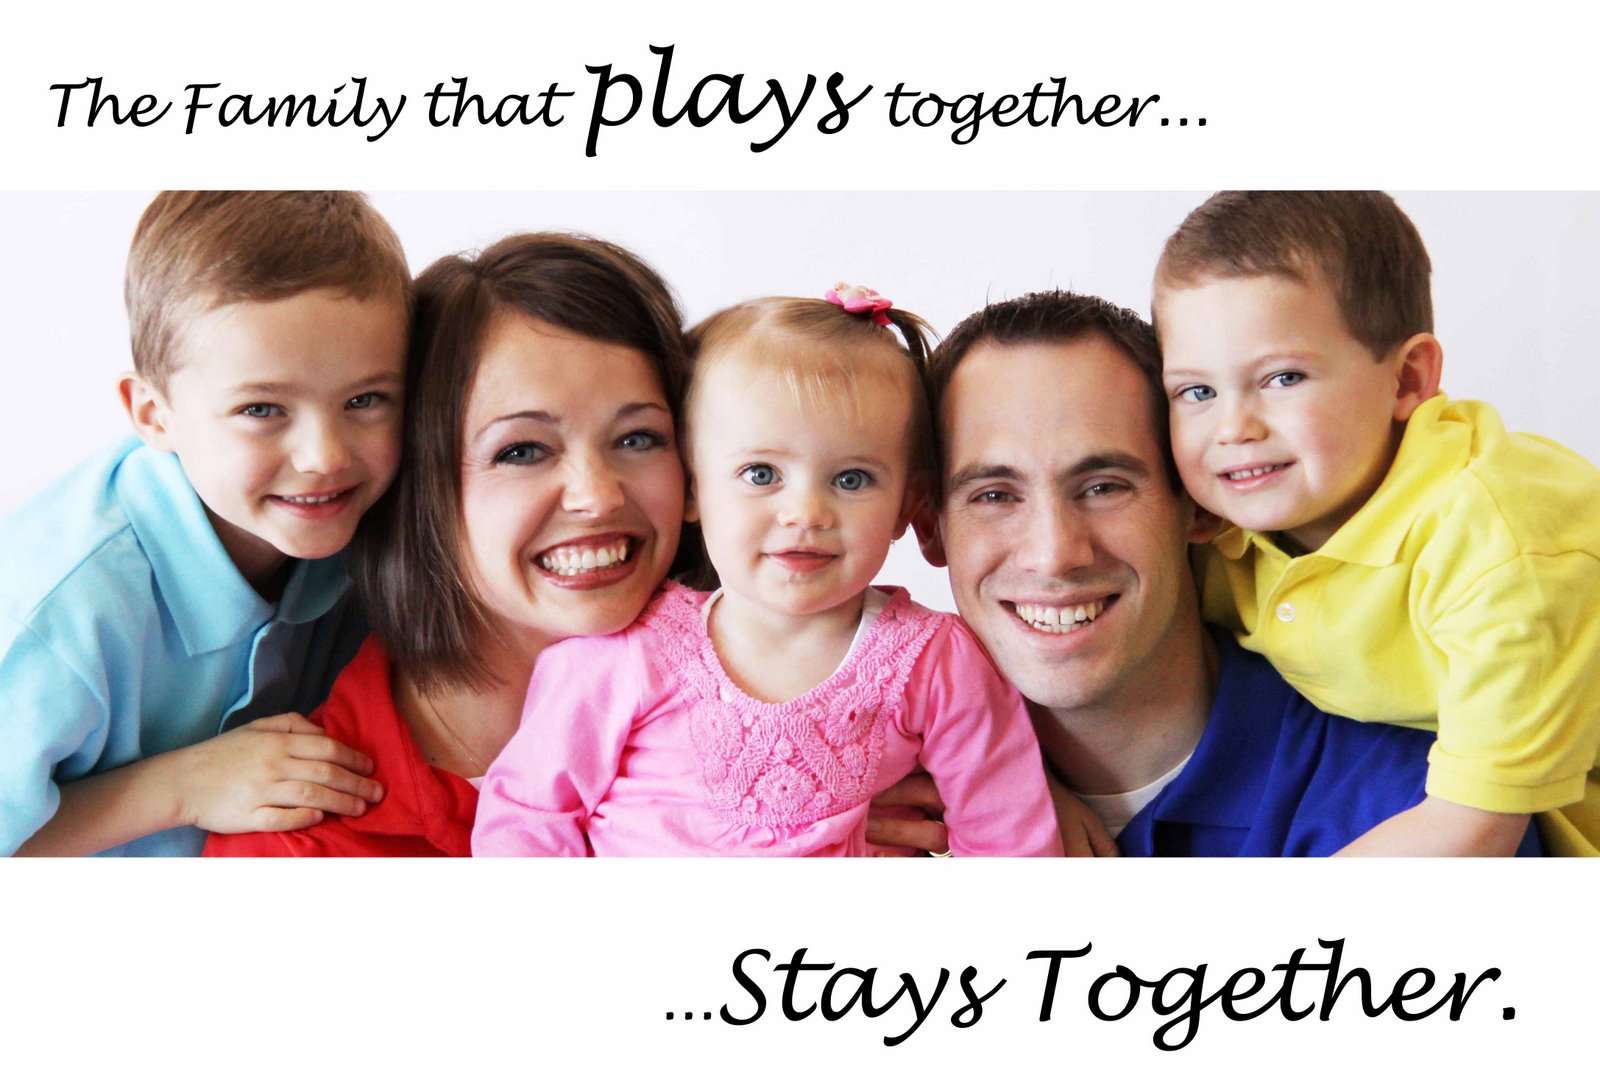 [YOUNG+FAMILY+plays+together+stays+together+5x7+color+2.jpg]